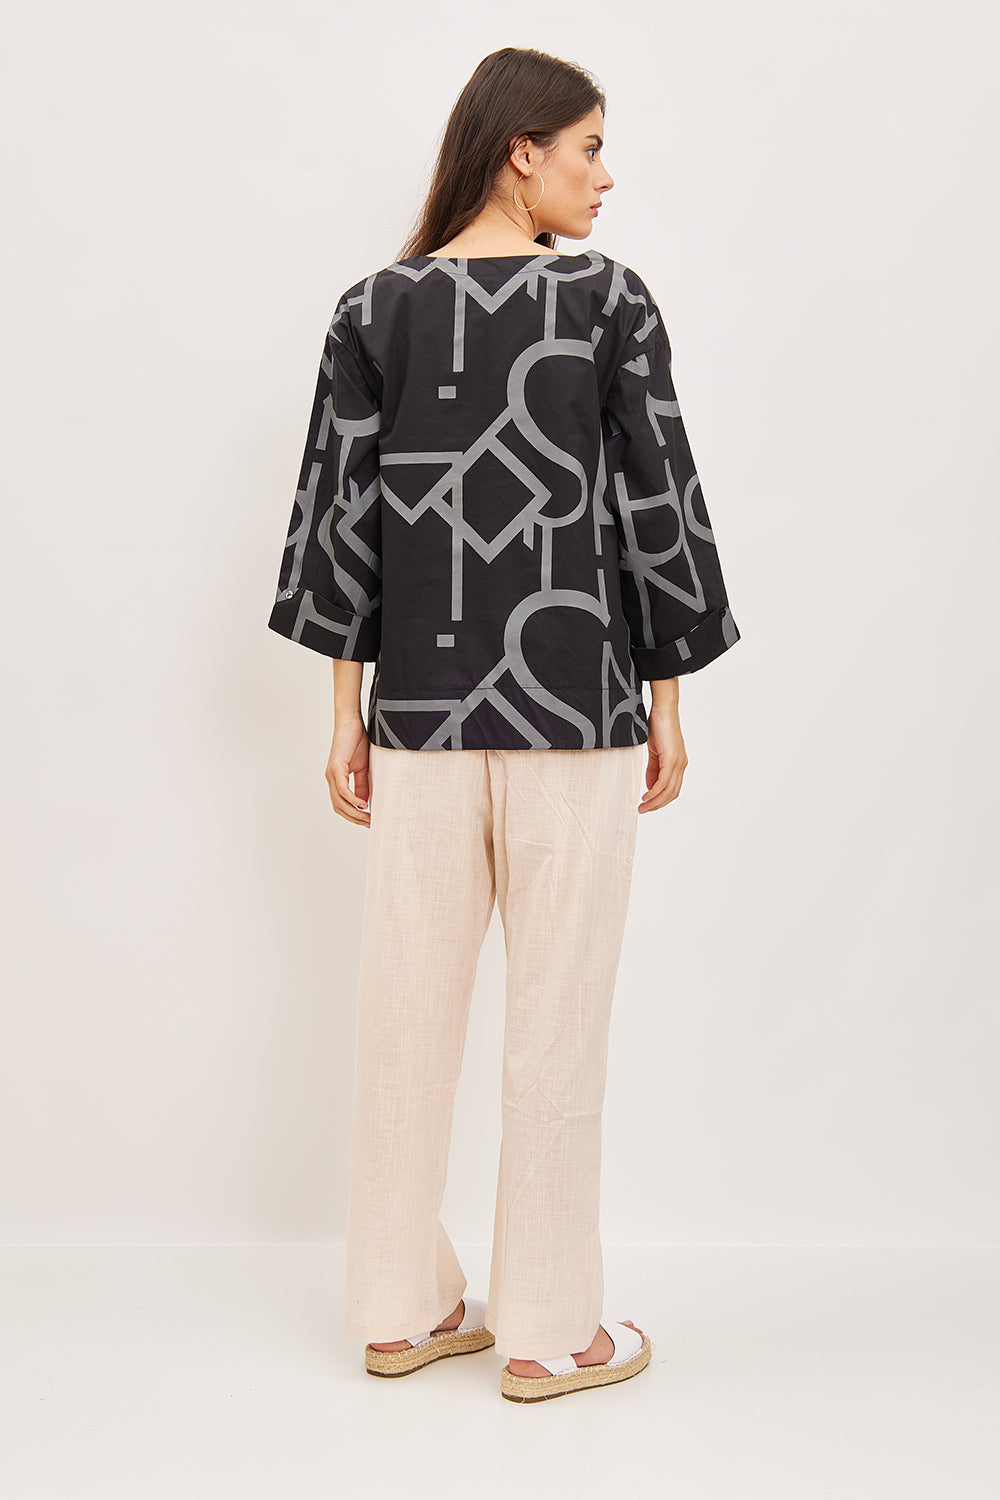 Blouse with straight and rounded patterns